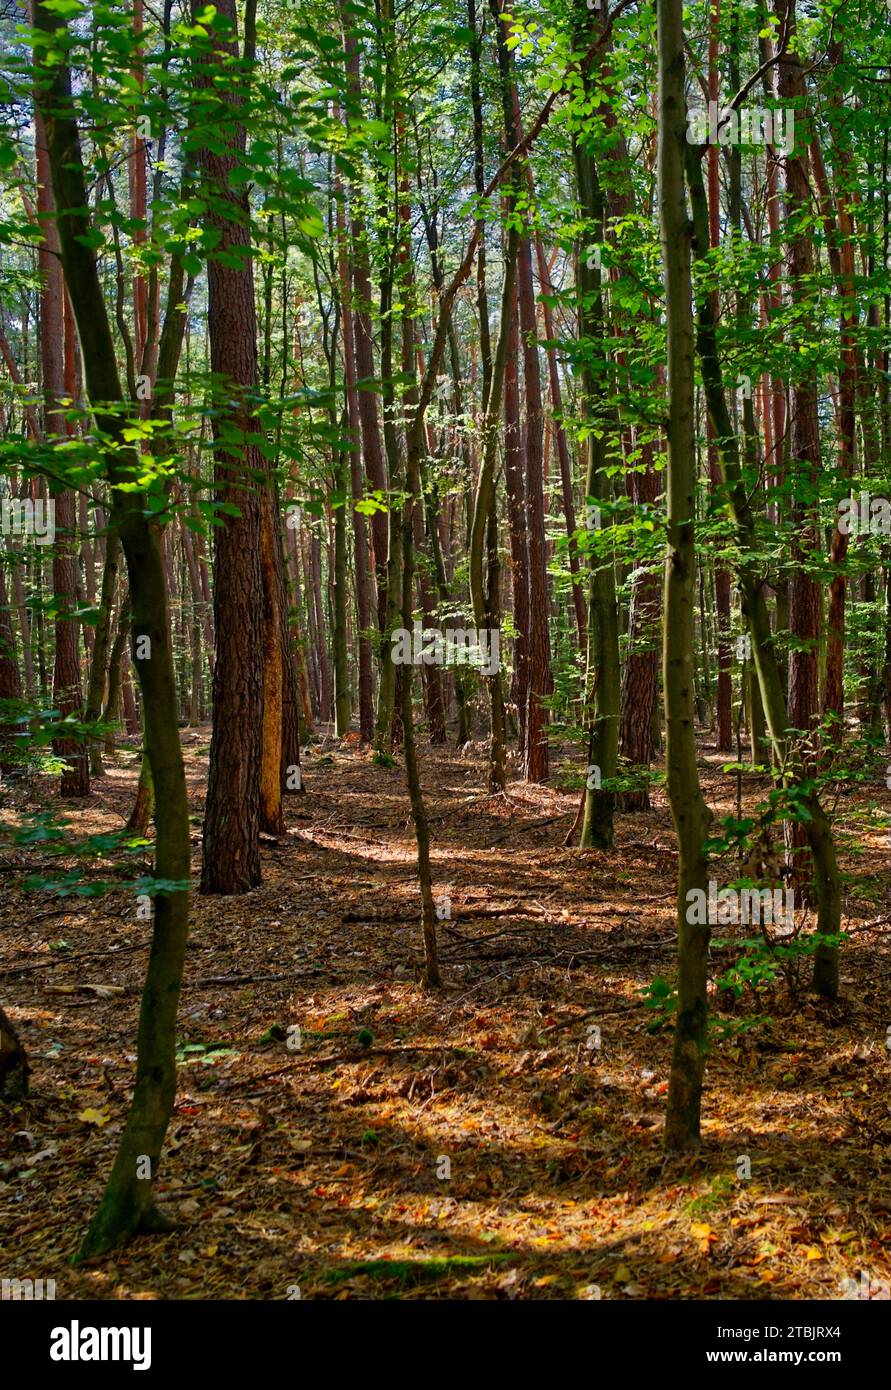 View at a sunlit light woodland with small trees in green and brown colors Stock Photo